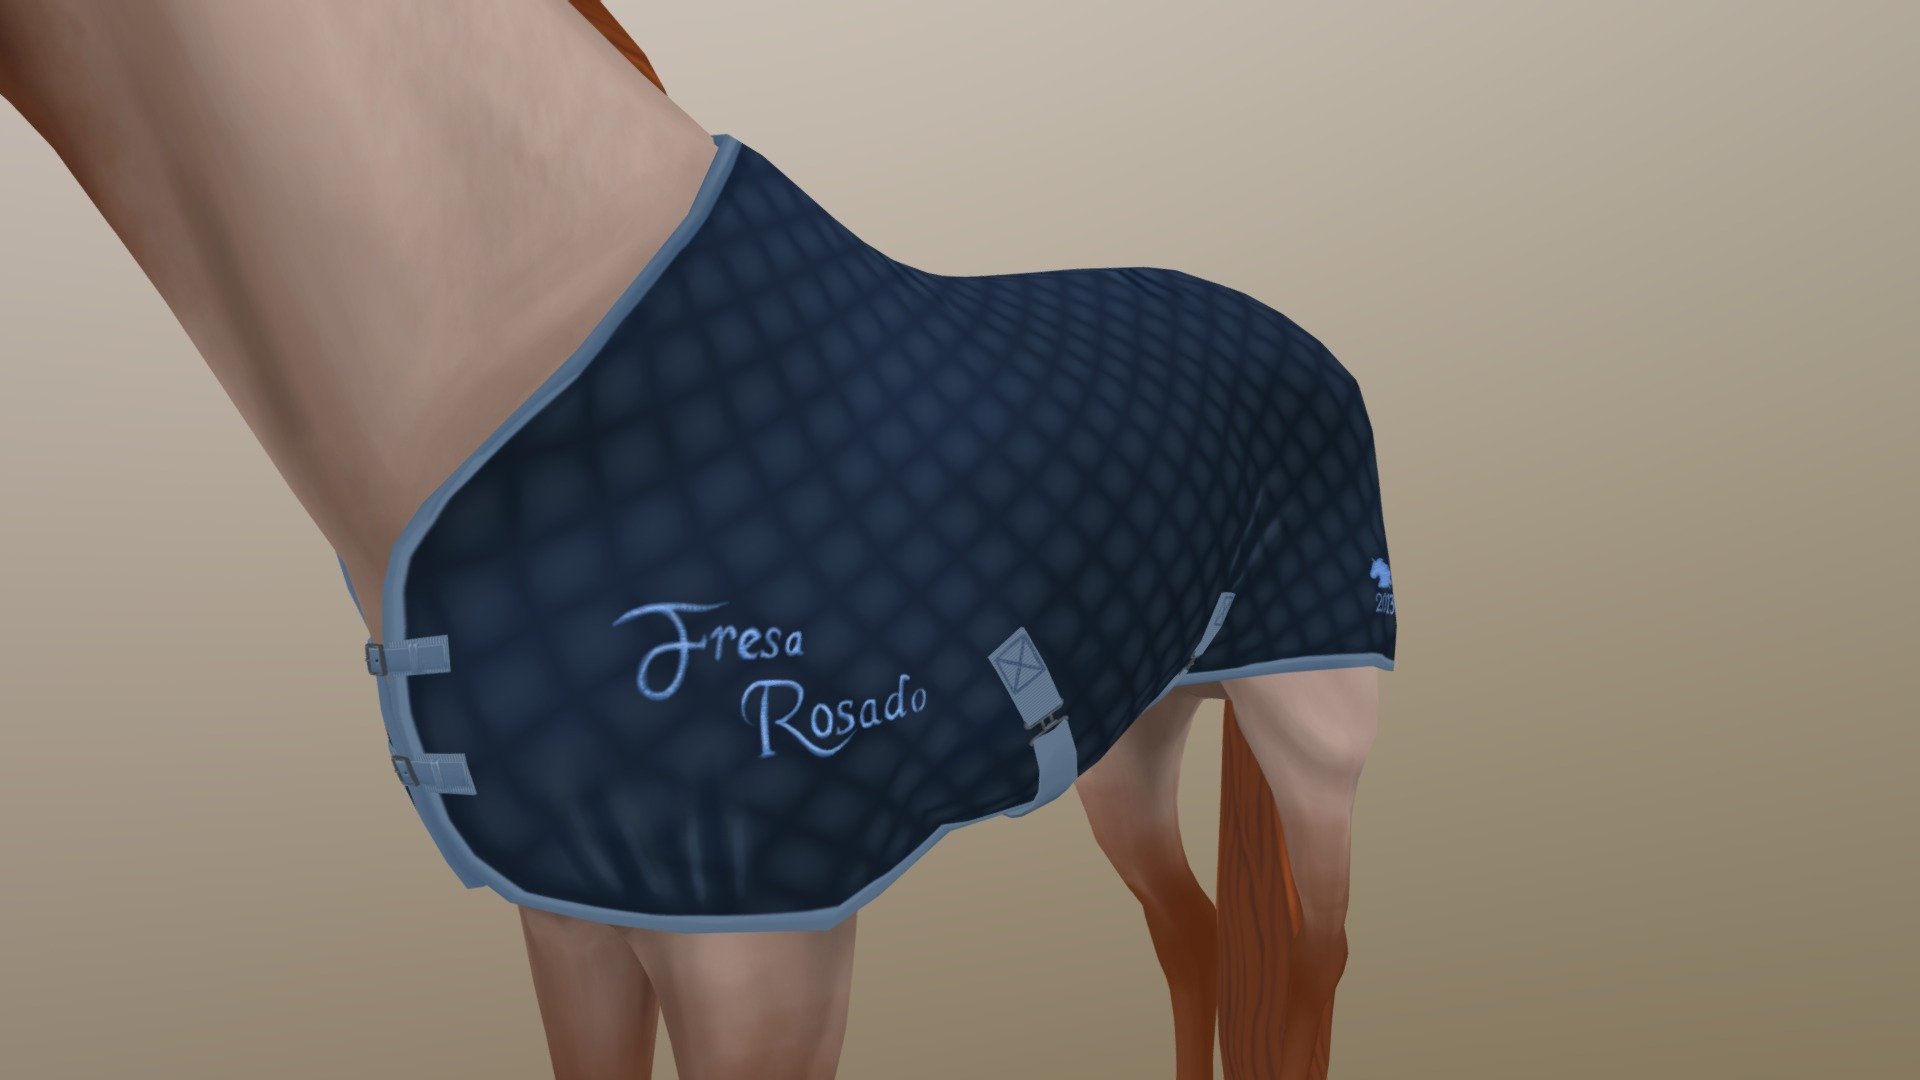 Horse Blanket made for the MangaLarga horse Fresa Rosado.

This was modelled in maya and textured in 3Dcoat and Photoshop 3d model